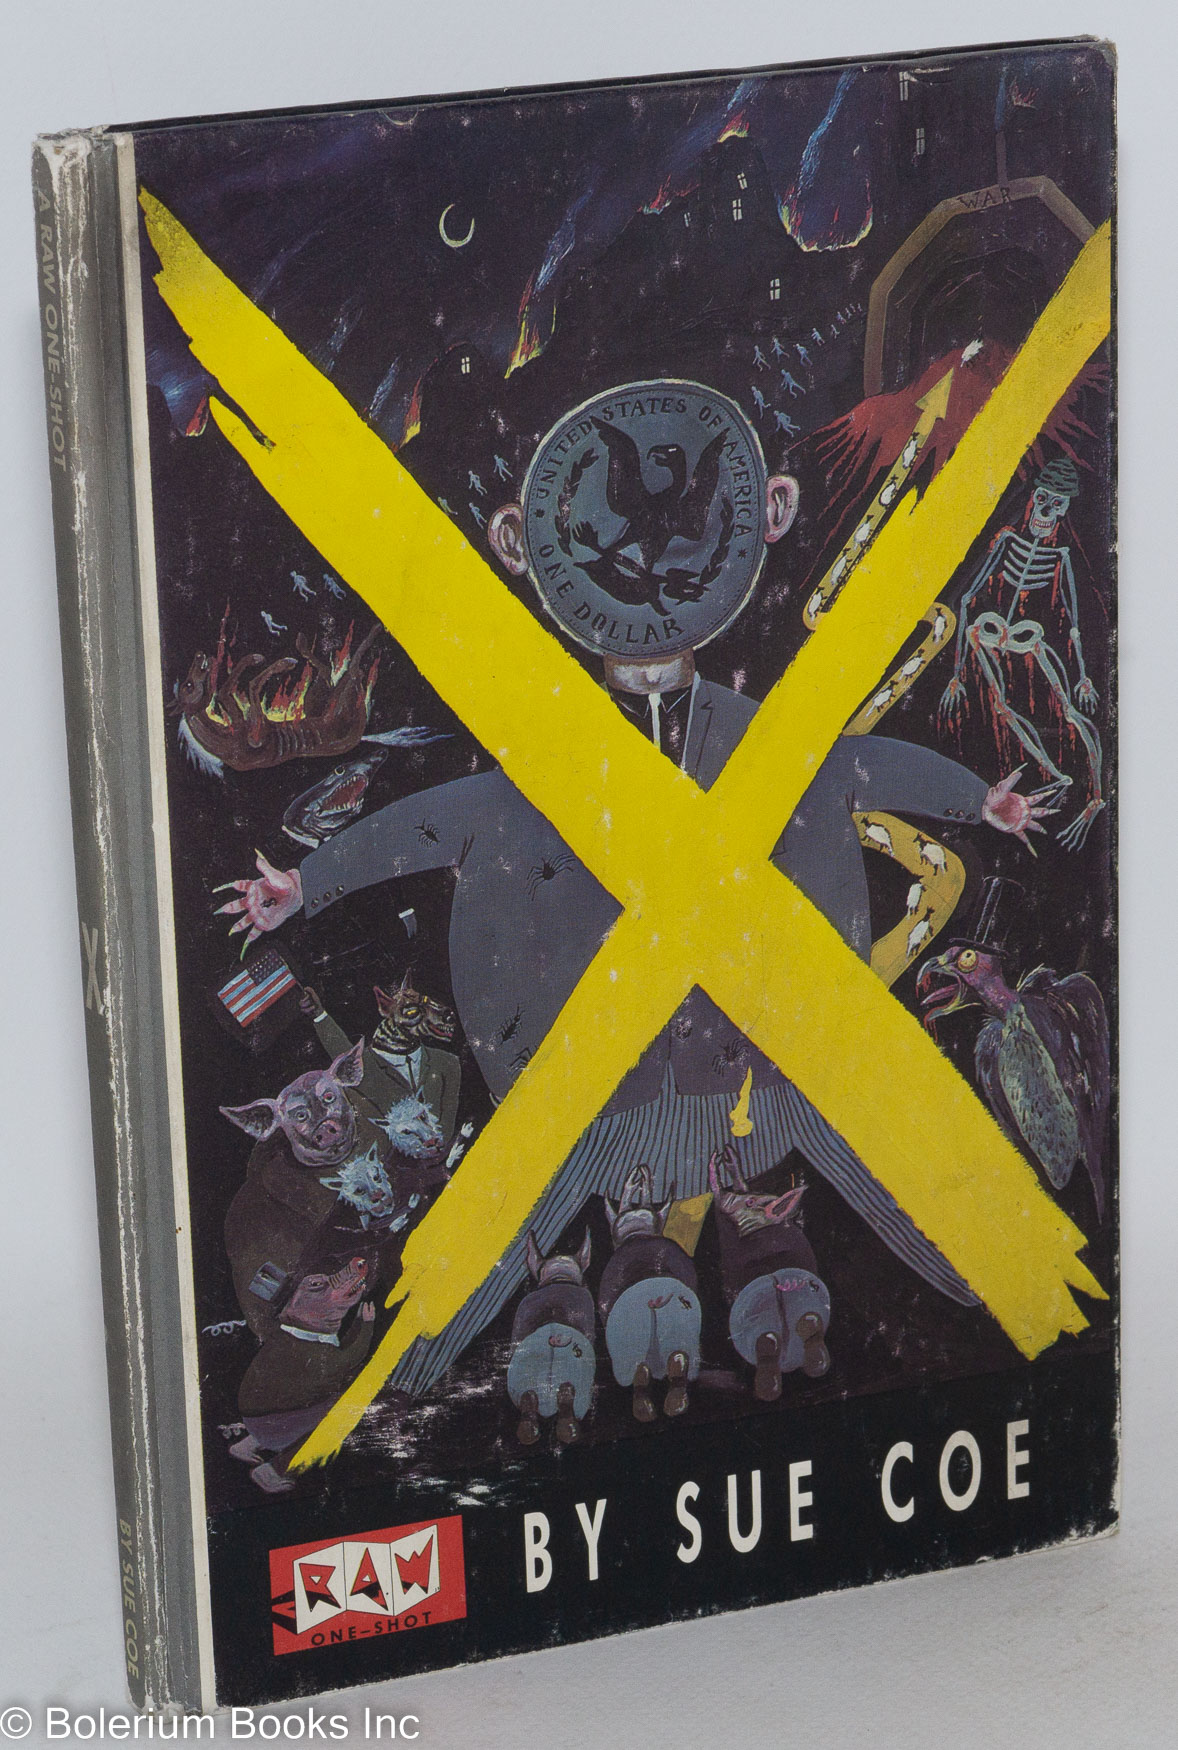 X; text by Sue Coe (with Art Spiegelman), 'concurrent events